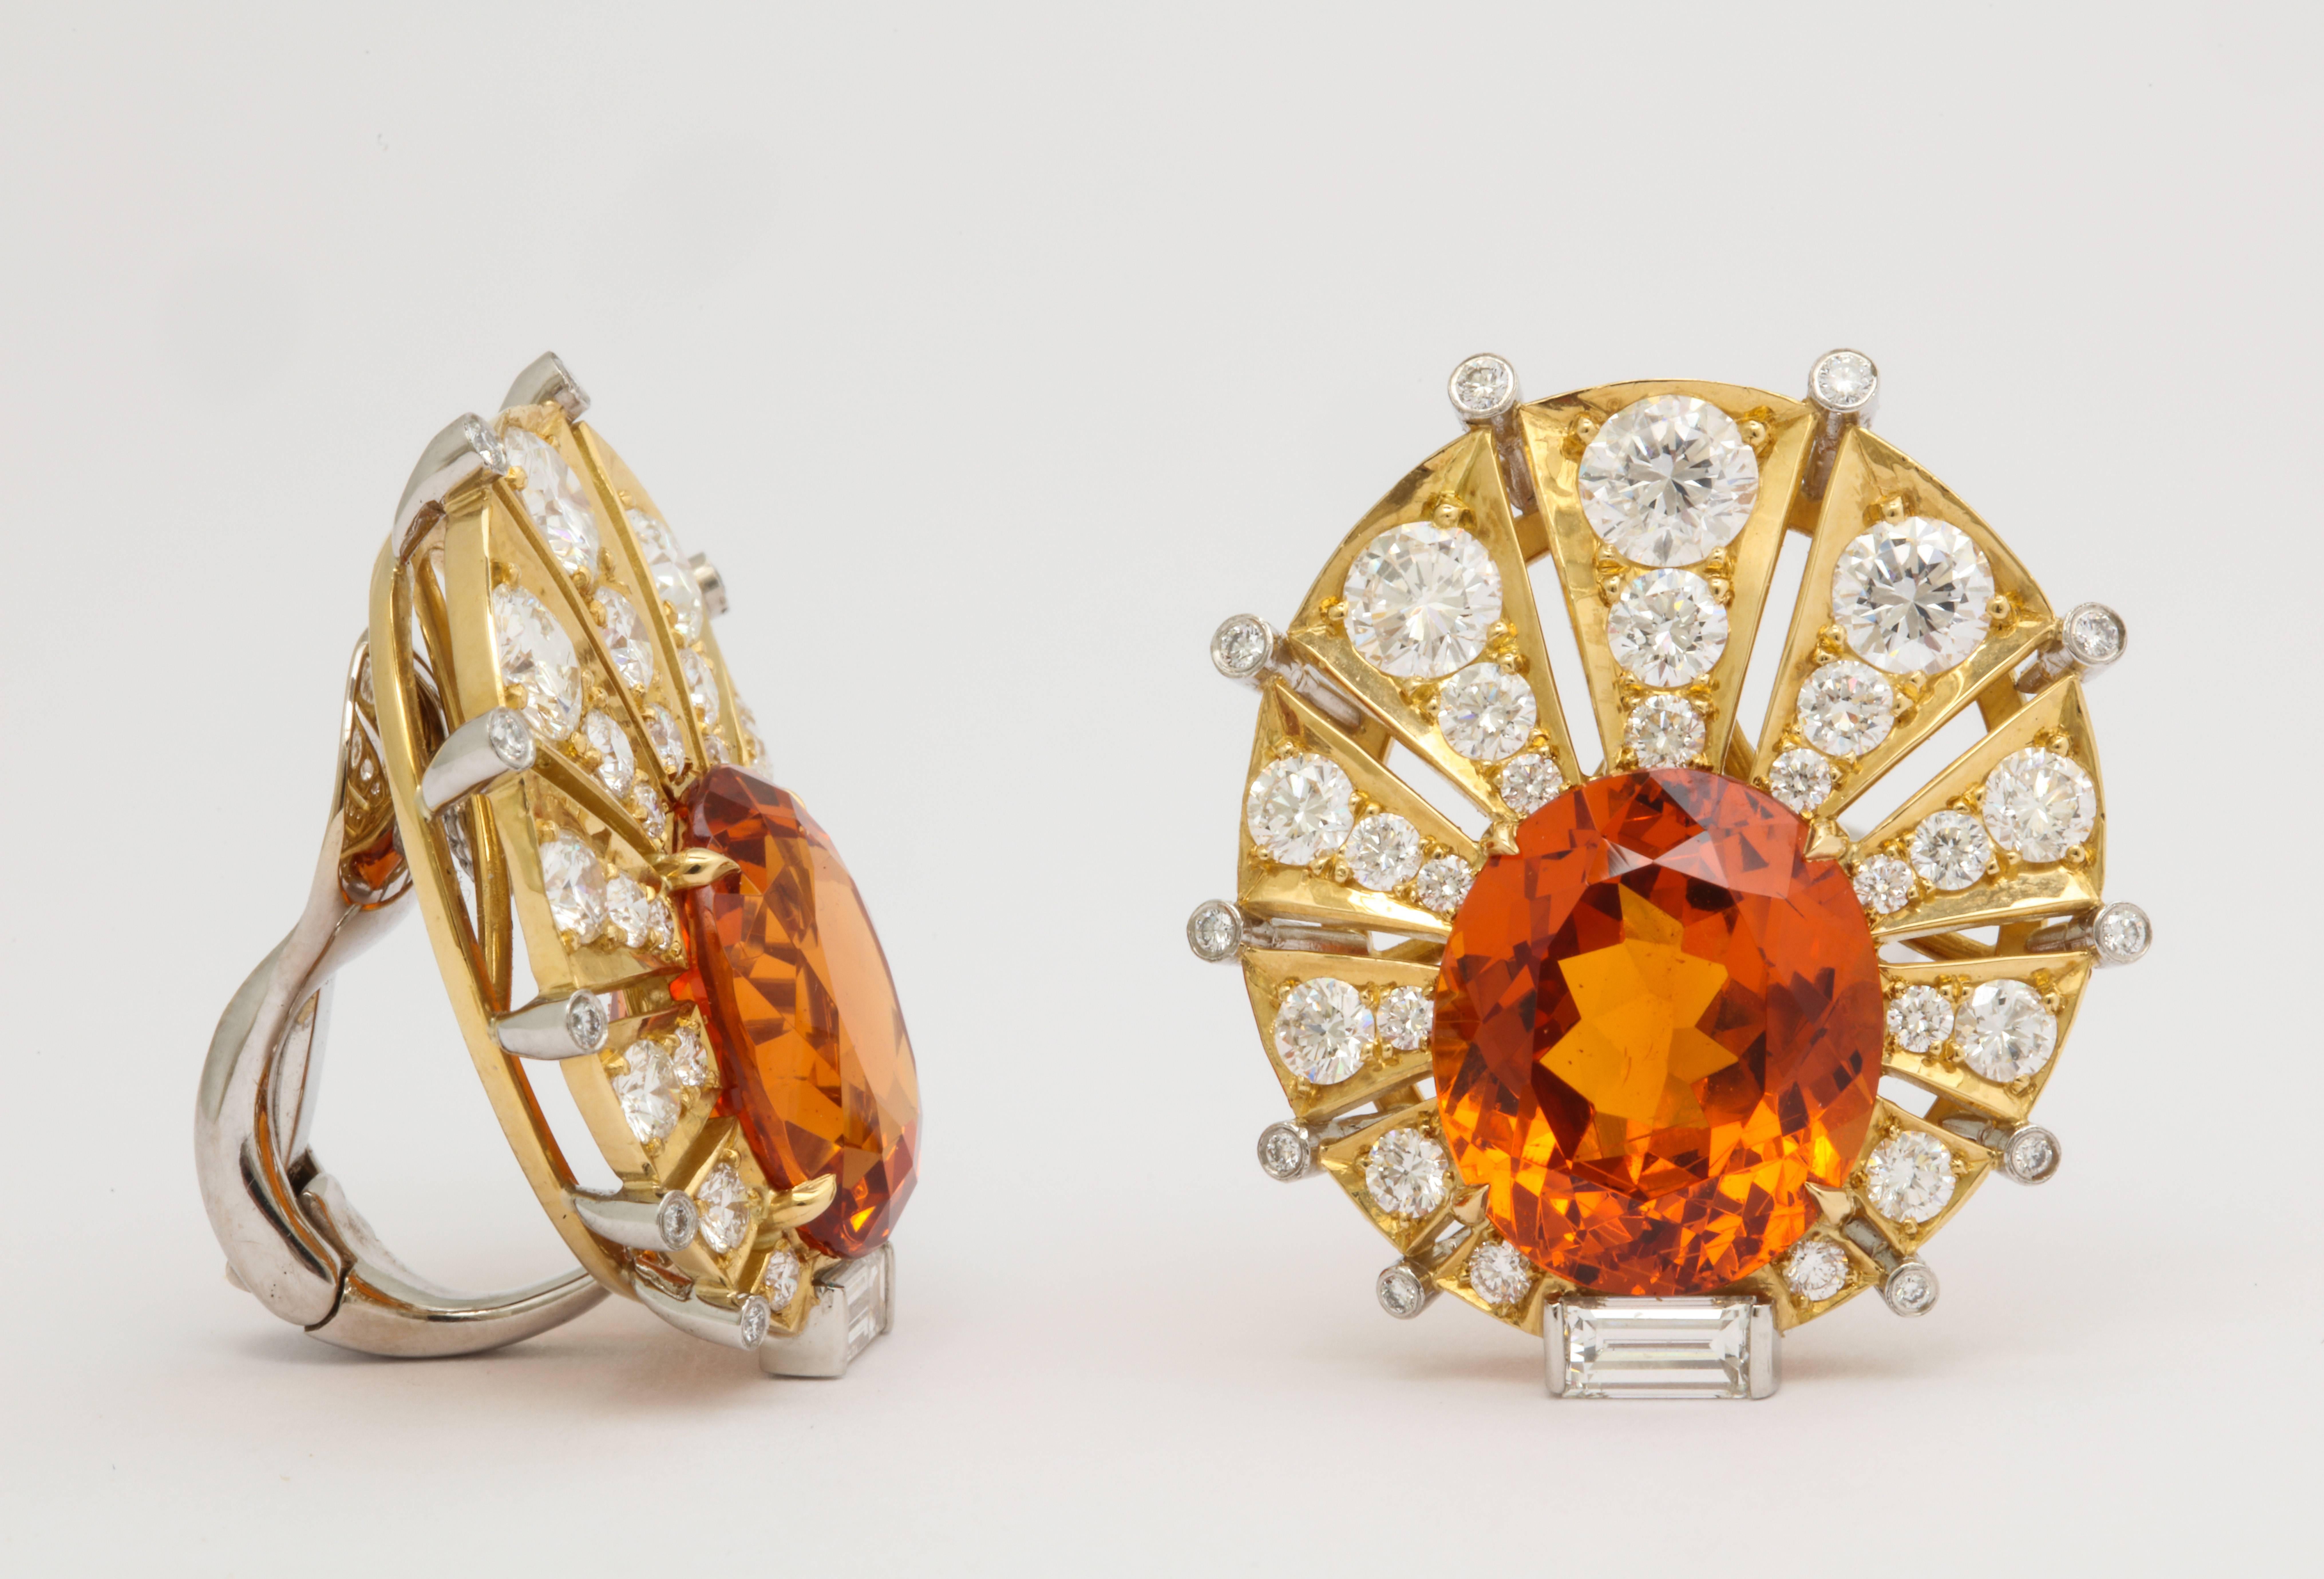 Already exceptionally rare on their own, a perfectly matched pair of mandarin garnets is almost unheard of.  These beautiful ovals weigh 10.44cts and 10.78cts making them that much more impressive for their size.  The bold look is expertly mounted